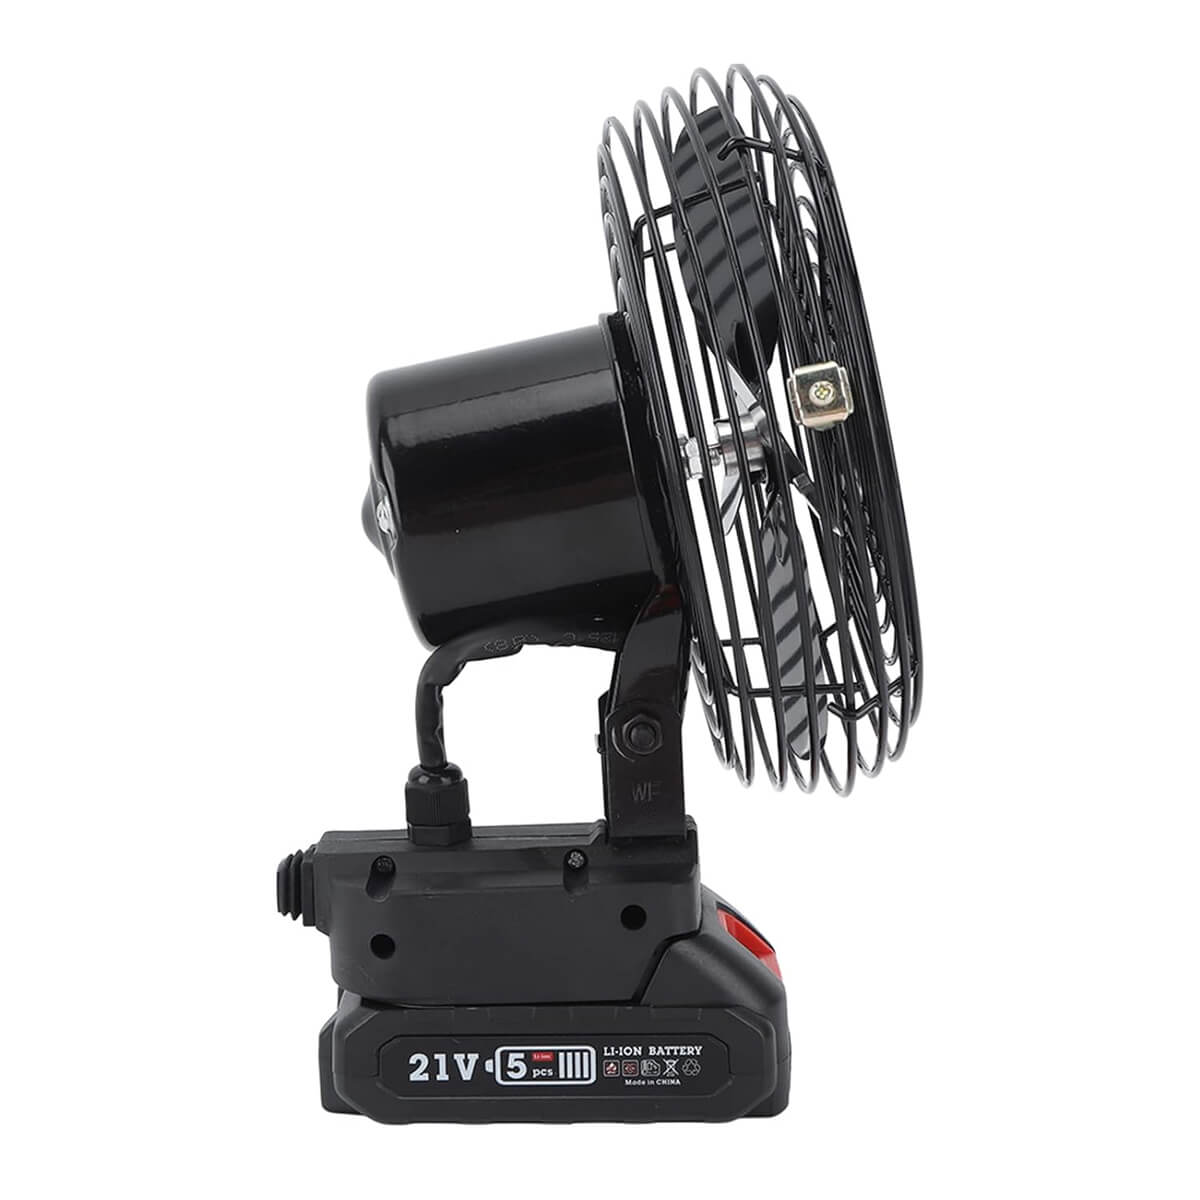 Portable Camping Fan with 21V Rechargeable Battery